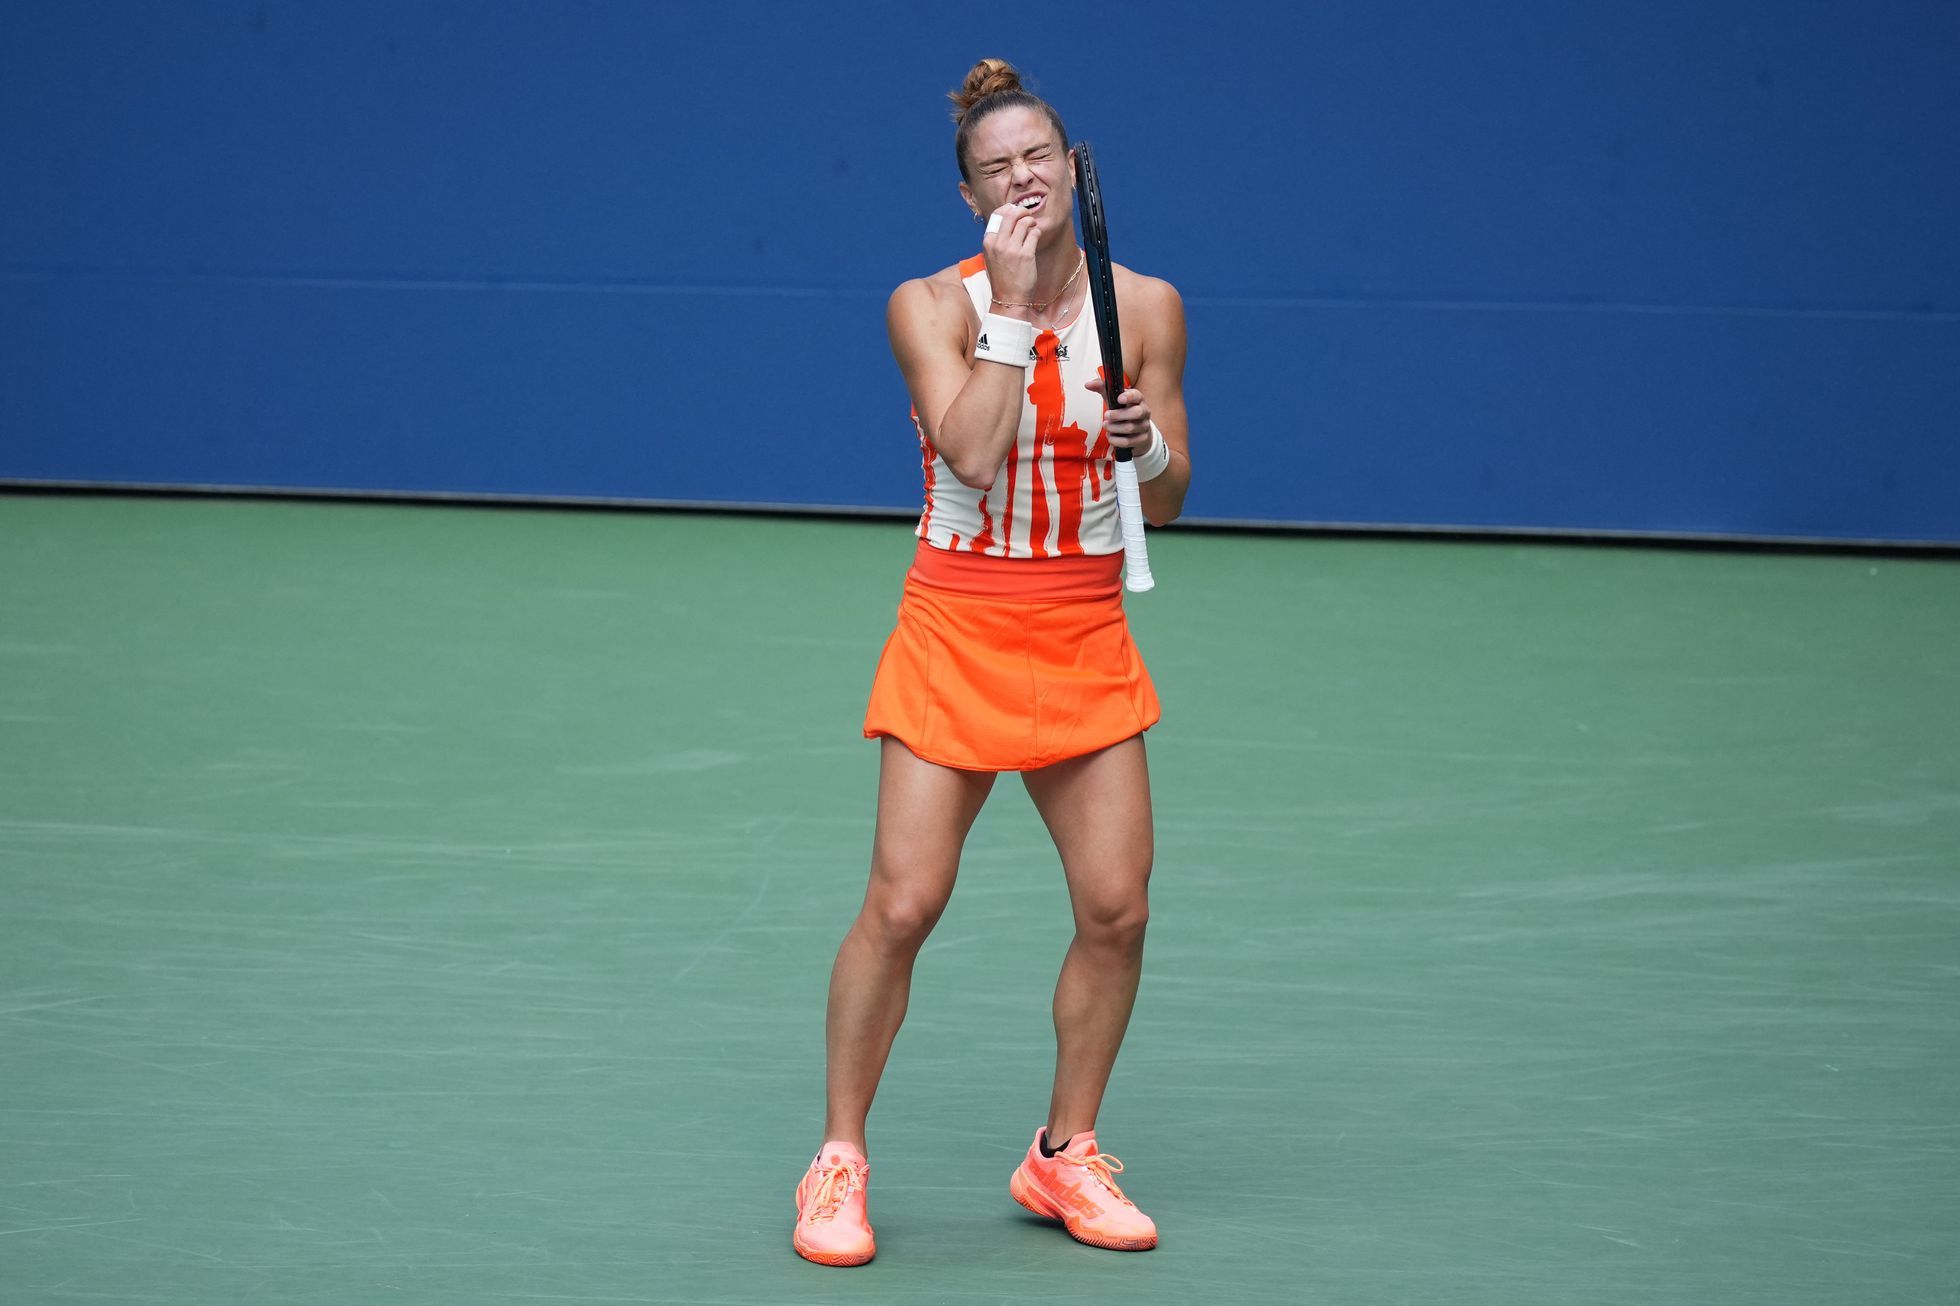 Another favorite is over.  World No. 3 Sakkari was eliminated at the US Open in the second round